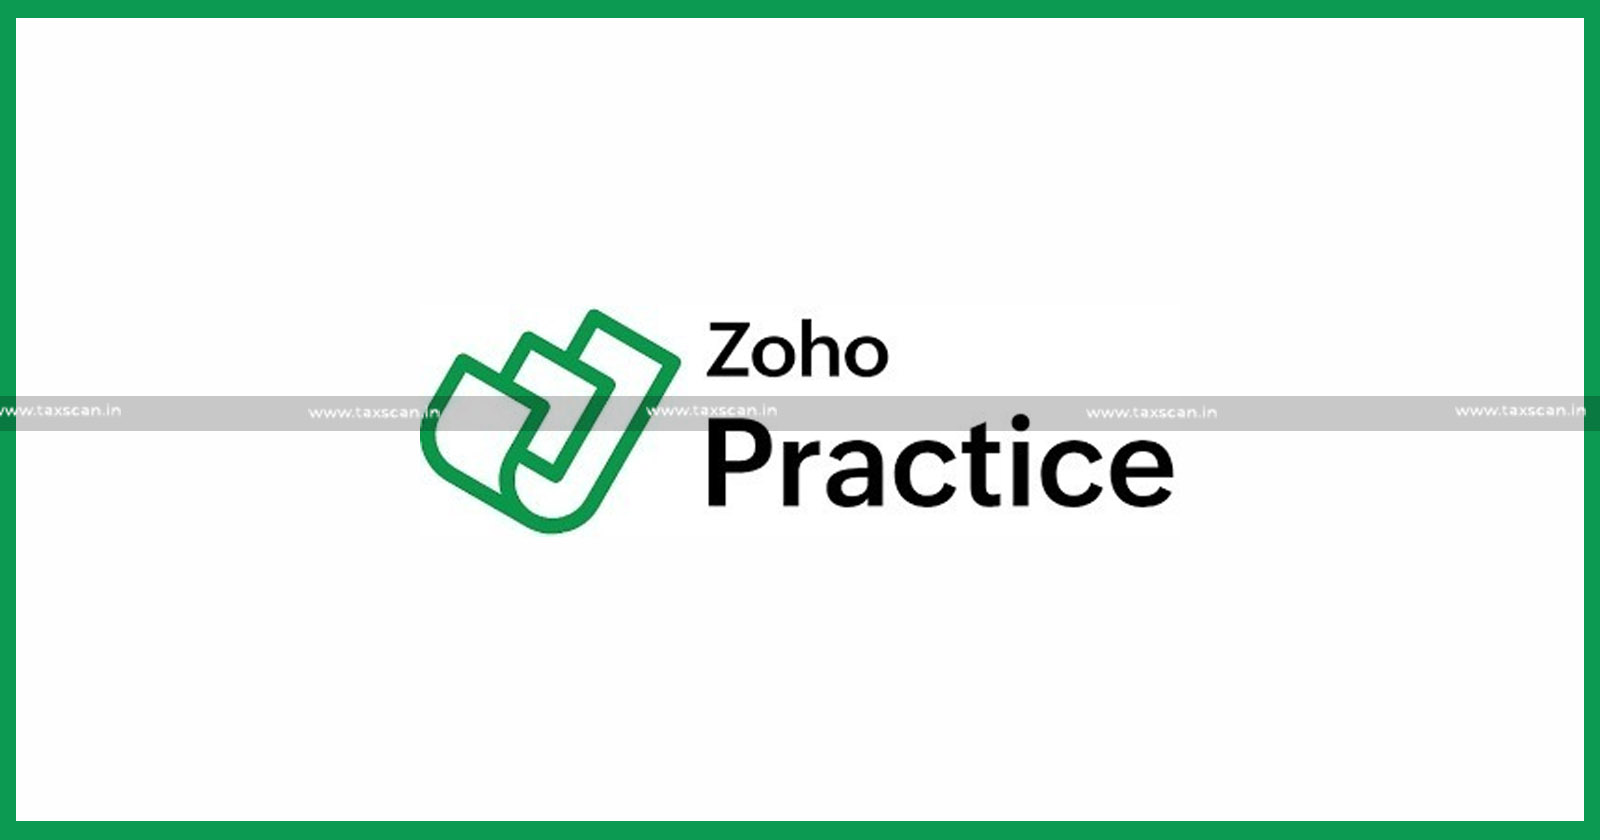 Practice Management Software - Management Software - Zoho Practice - Chartered Accountants - Accountants - Zoho Practice Features - Zoho Latest News - TAXSCAN